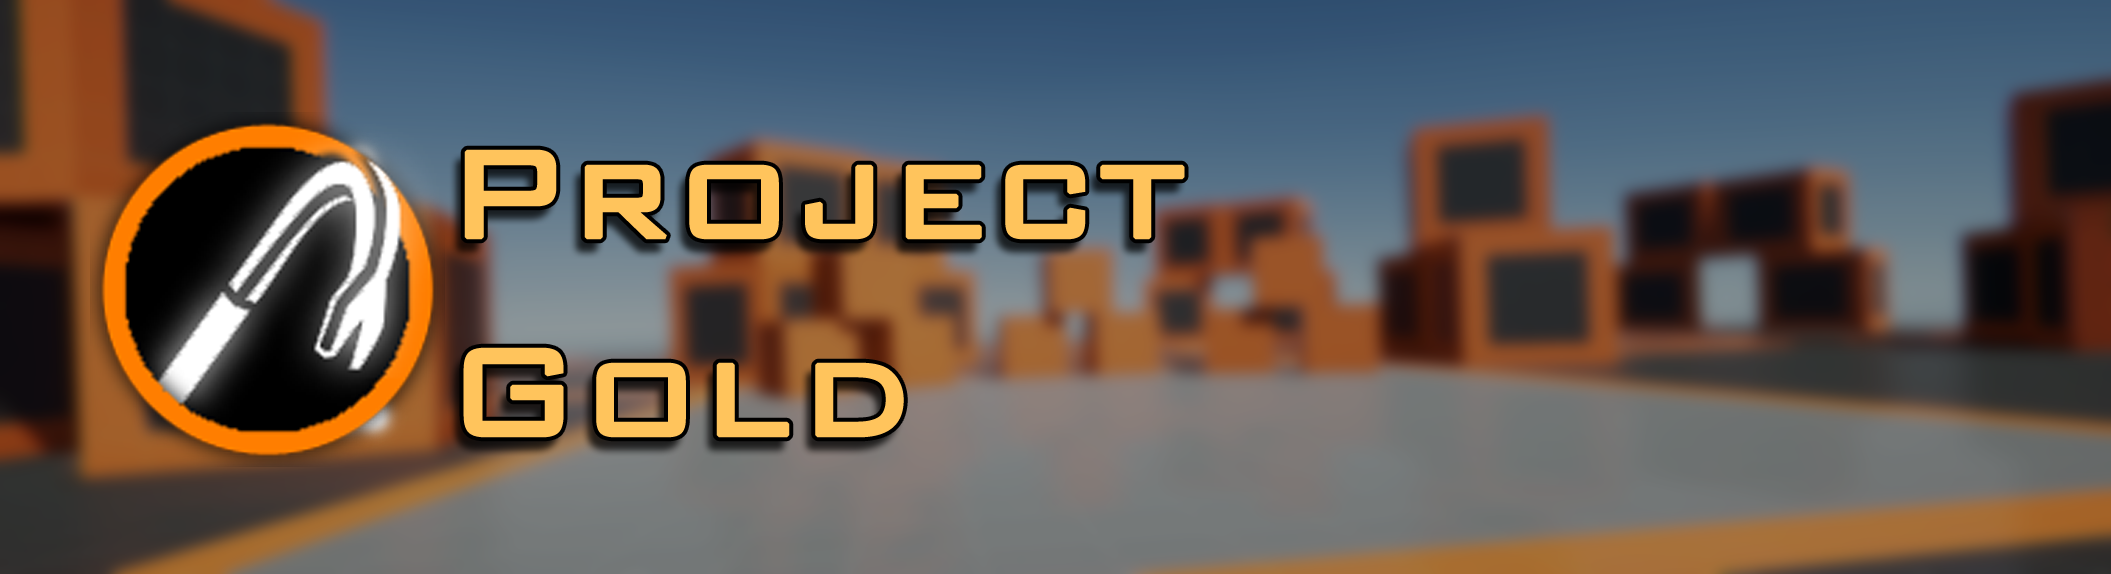 Project Gold